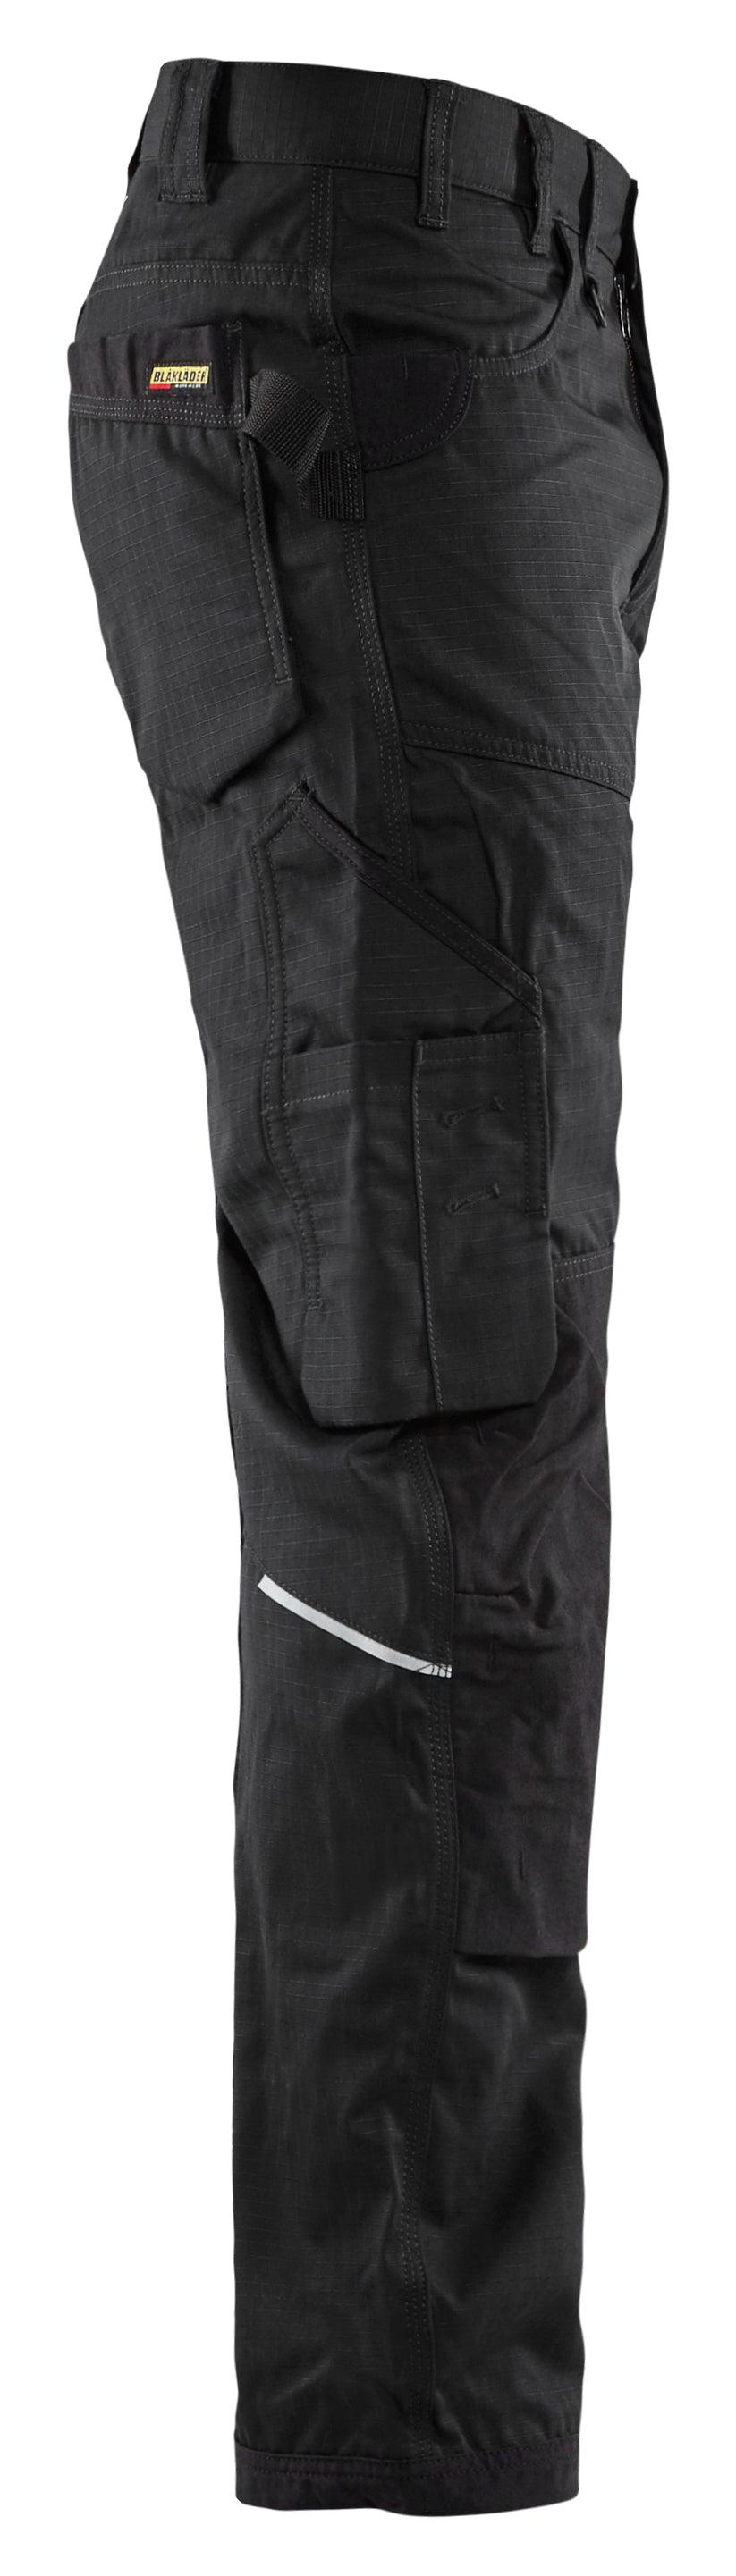 Blaklader 1690 7oz Rip Stop Pants with Stretch - Black -Right side